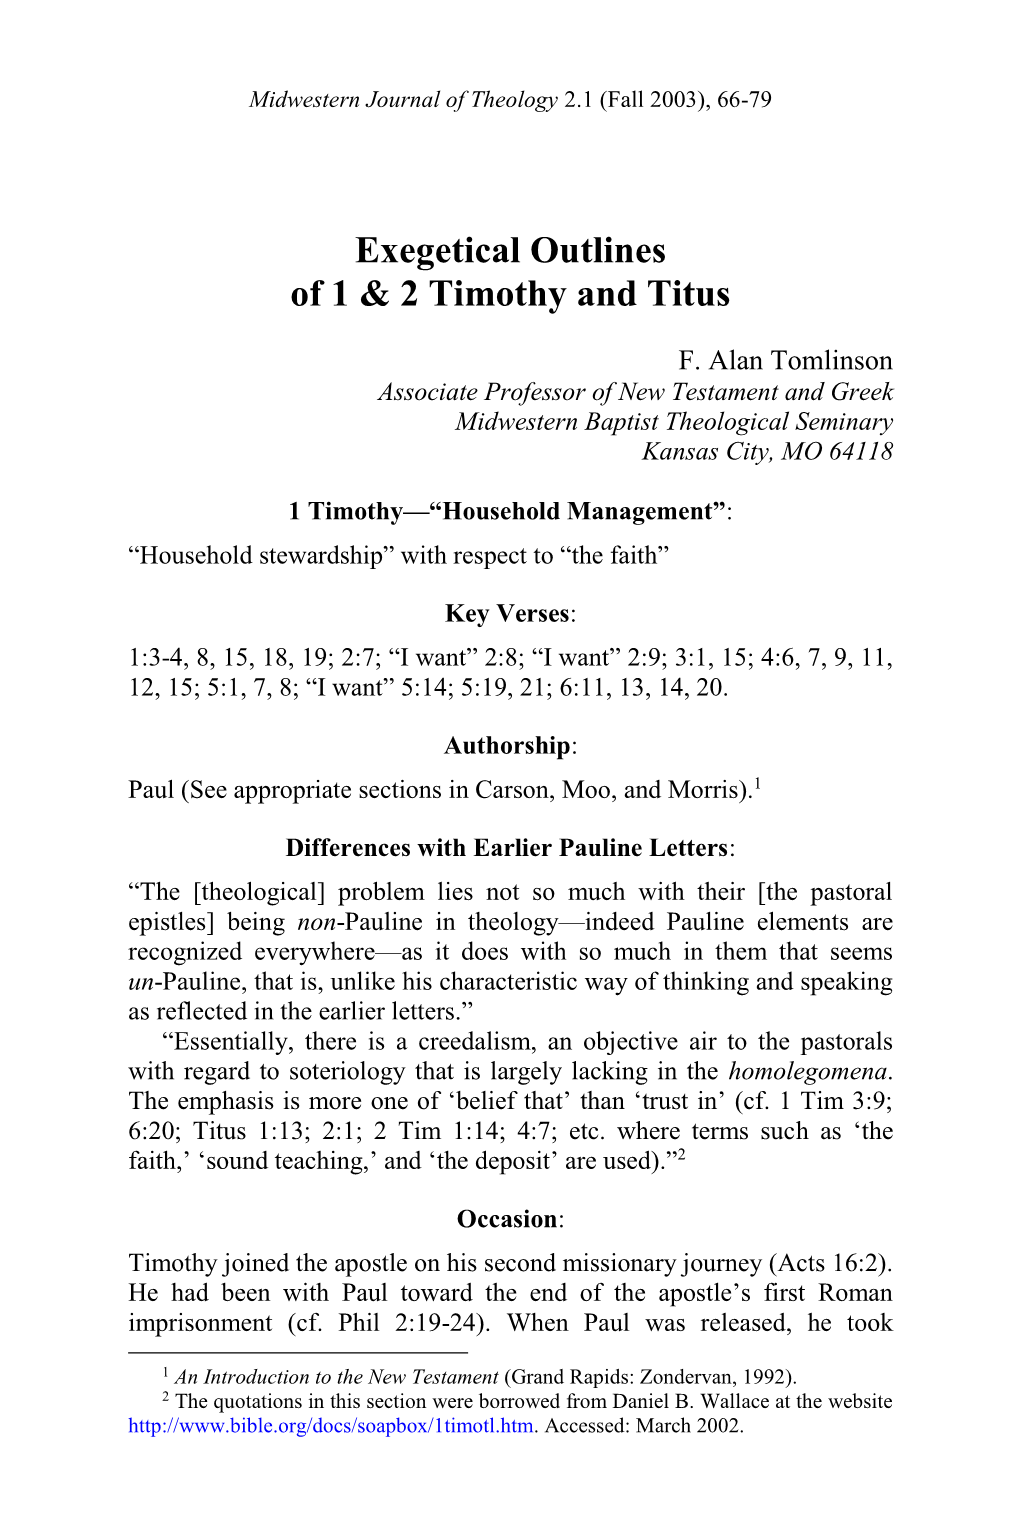 F. Alan Tomlinson, "Exegetical Outlines of 1 & 2 Timothy and Titus,"